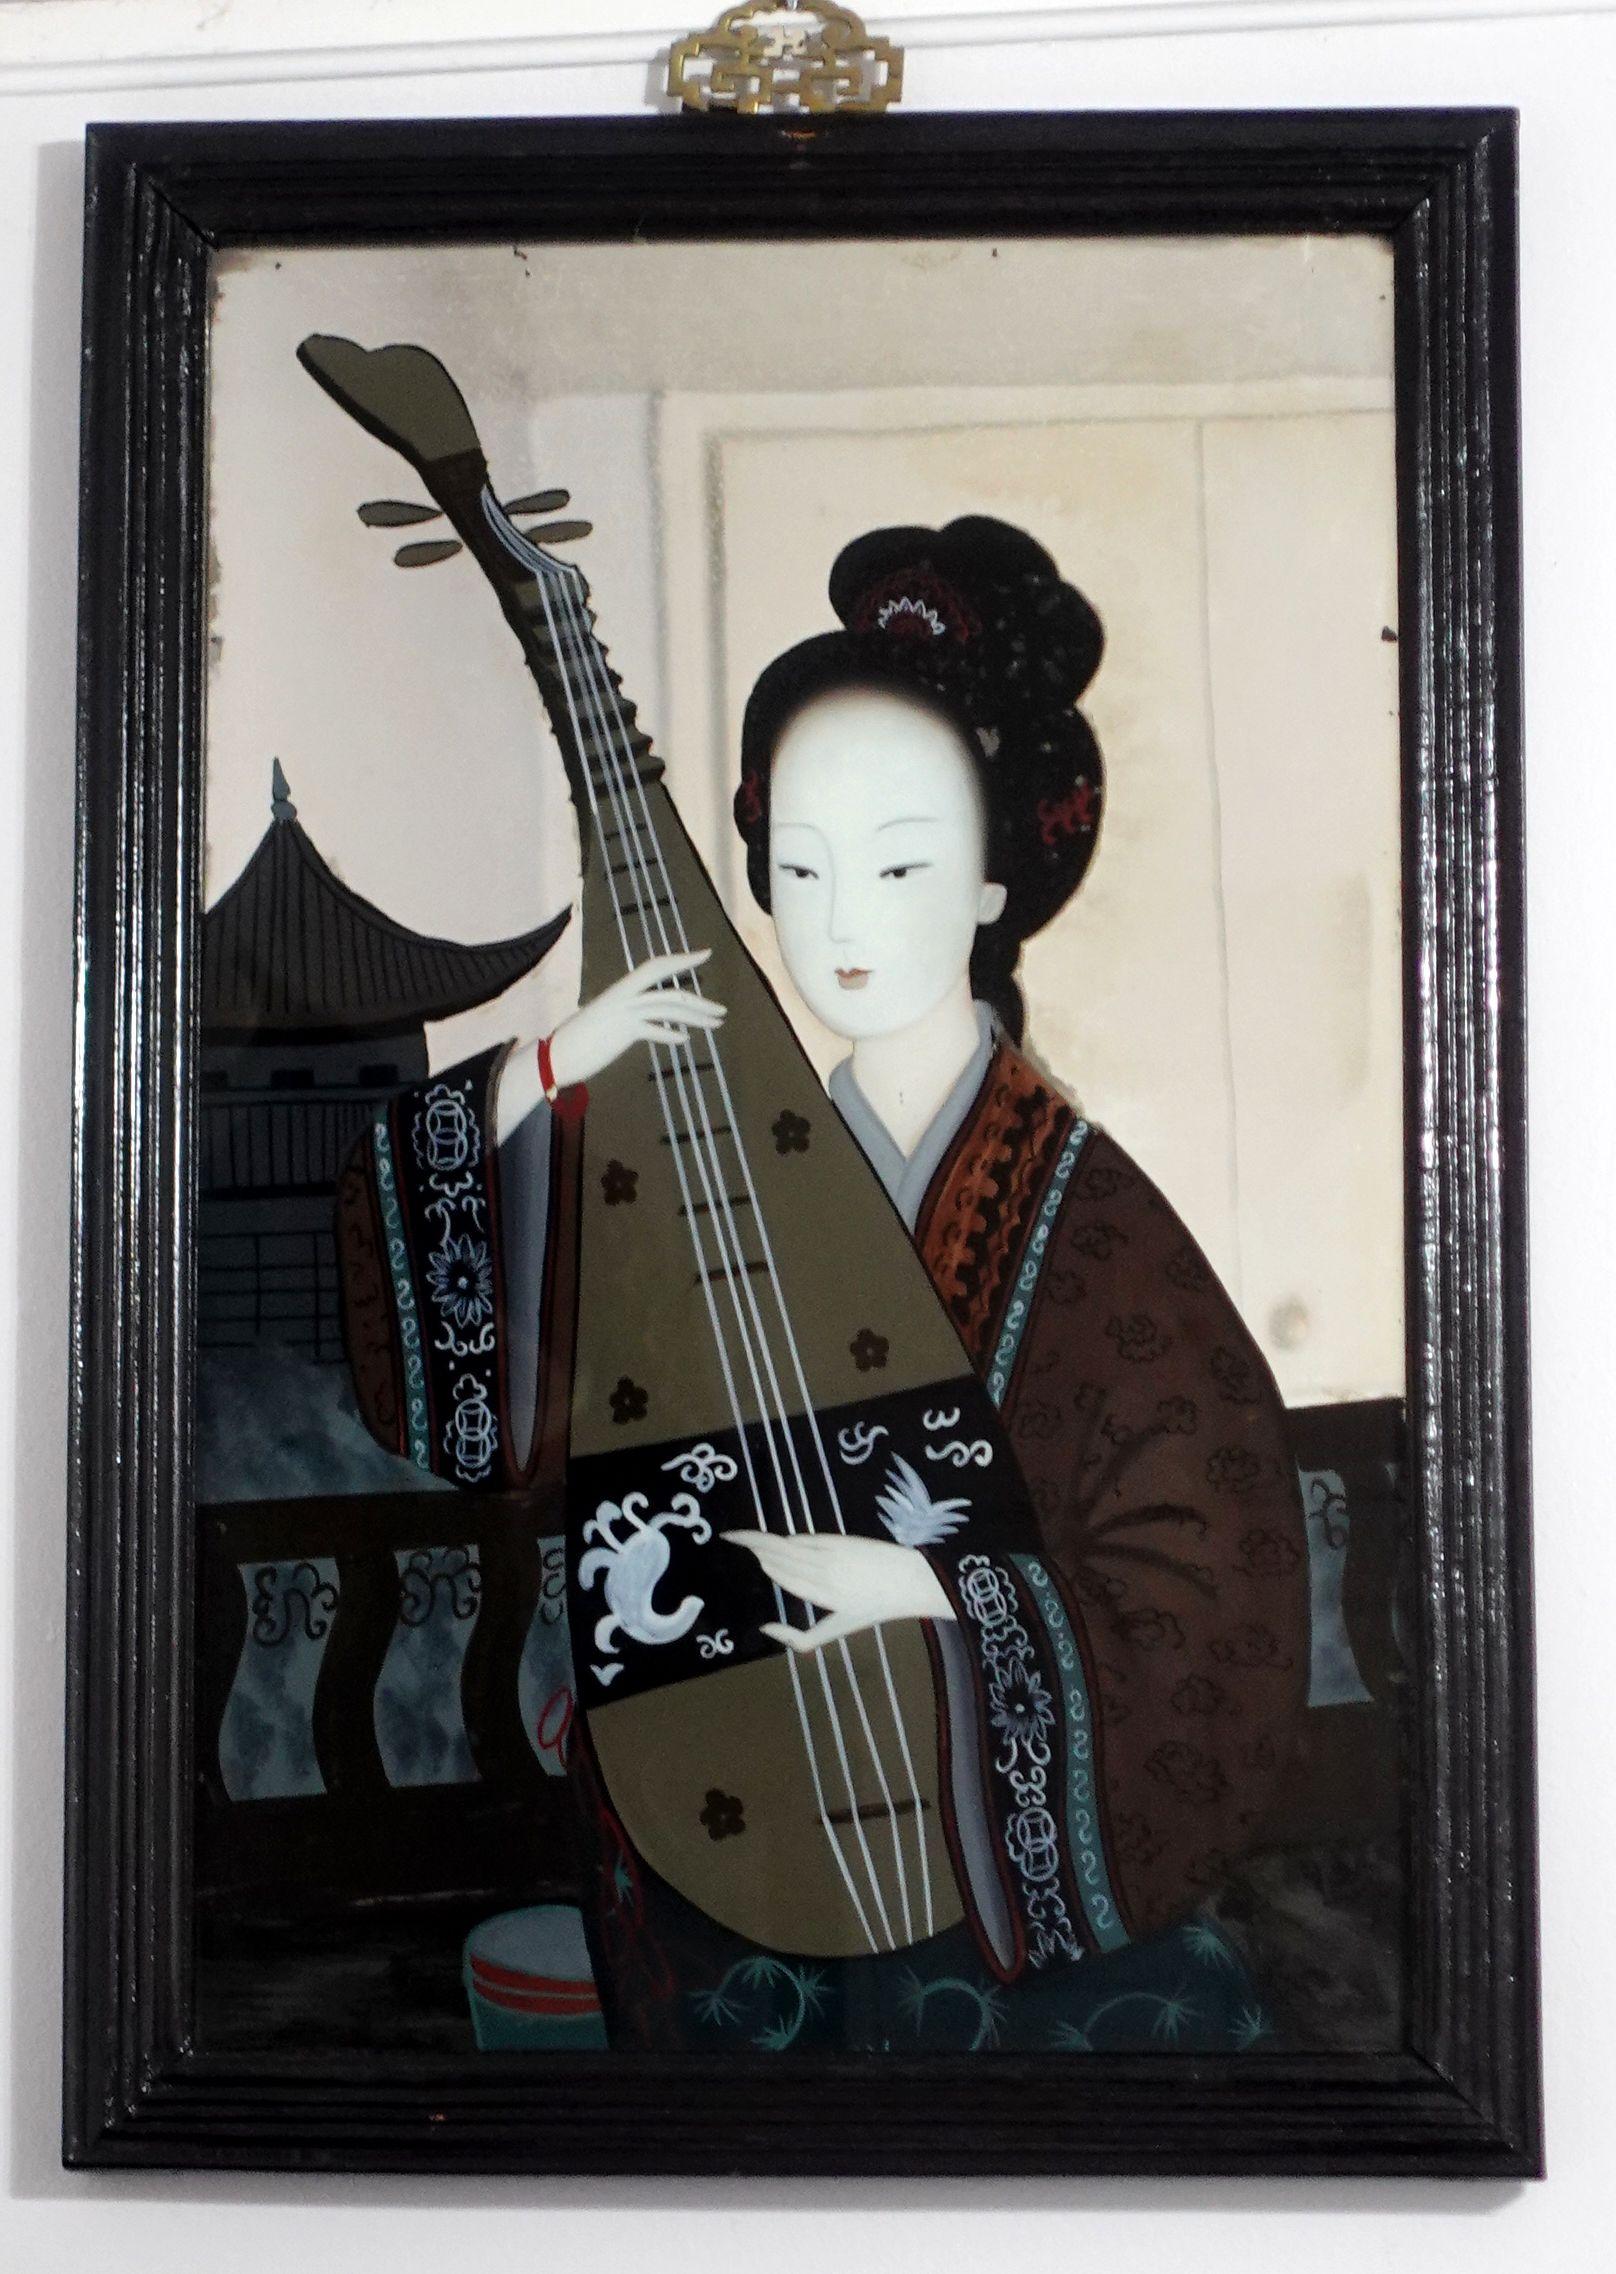 A large charming late 19th-century to early 20th-century, Chinese export reverse mirror painting, depicting a lady playing a Chinese musical instrument in her library. The painting comes with its original hardwood frame and the old pins in the back